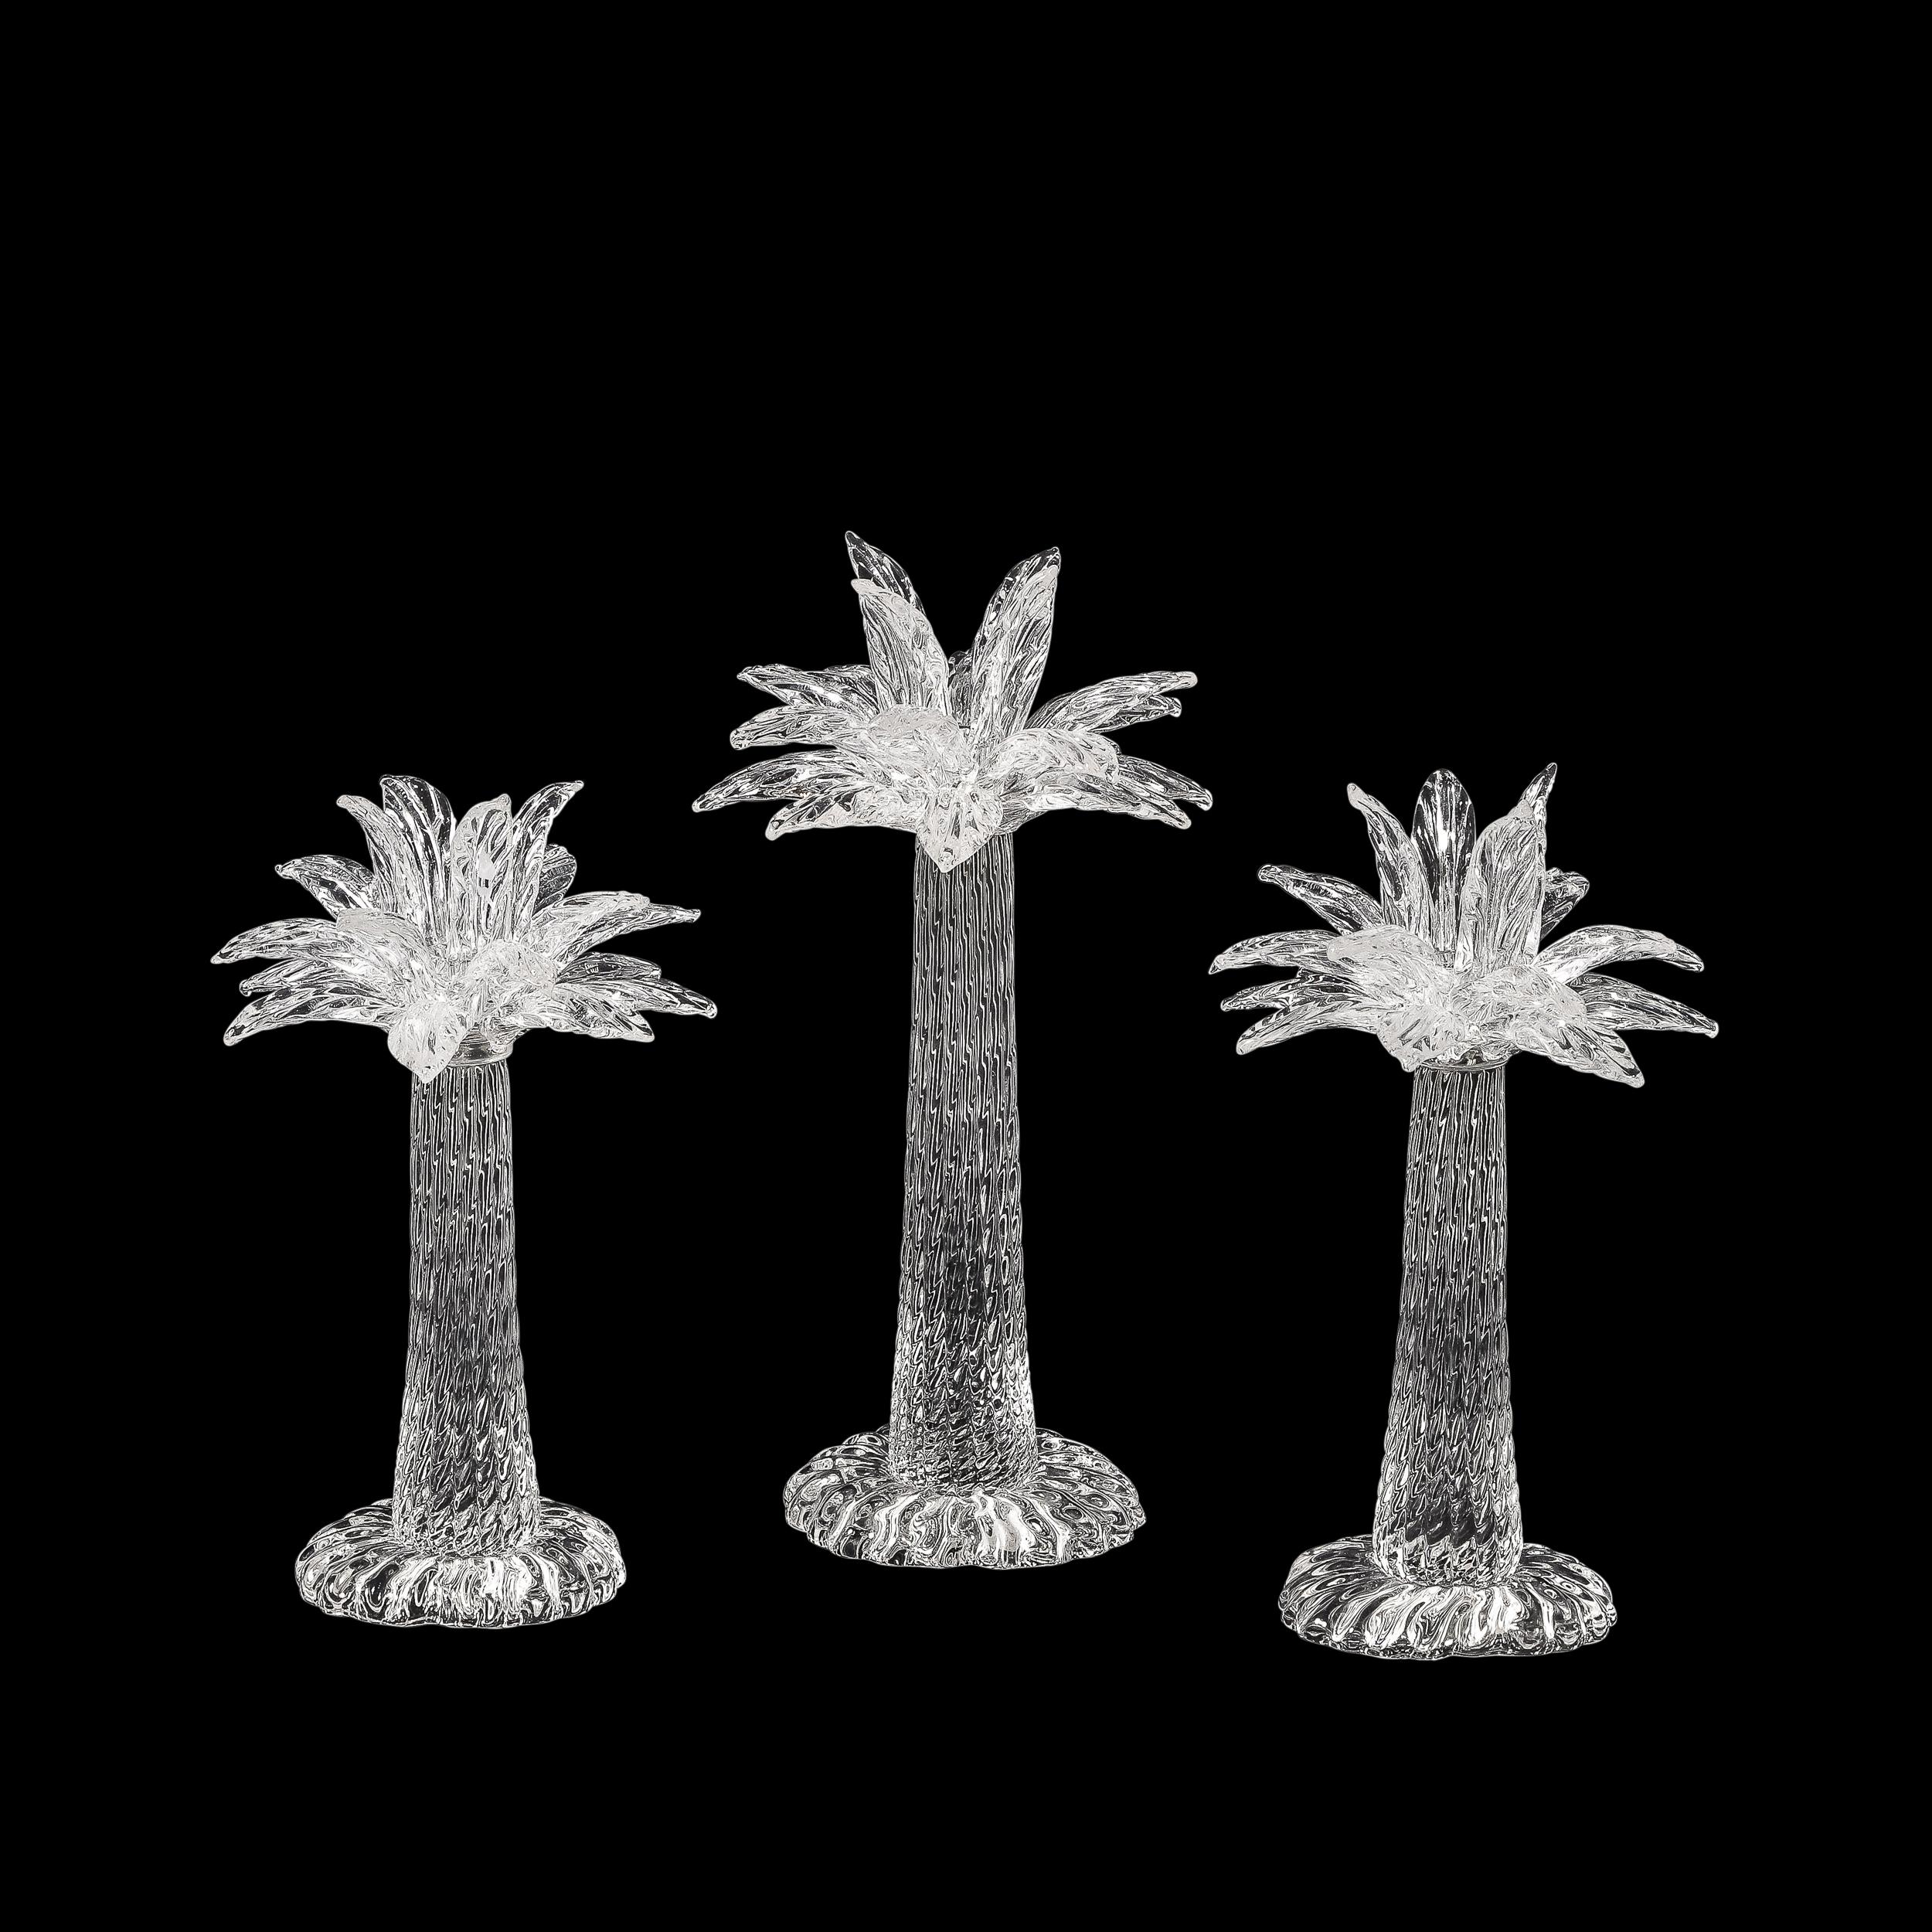 This beautifully made Set of Three Hand-Blown Murano Glass Palm Tree Candleholders are by Archimede Seguso for Tiffany and Co. and originate from Italy during the latter half of the 20th Century. Hand-blown in translucent glass with stunning crimped